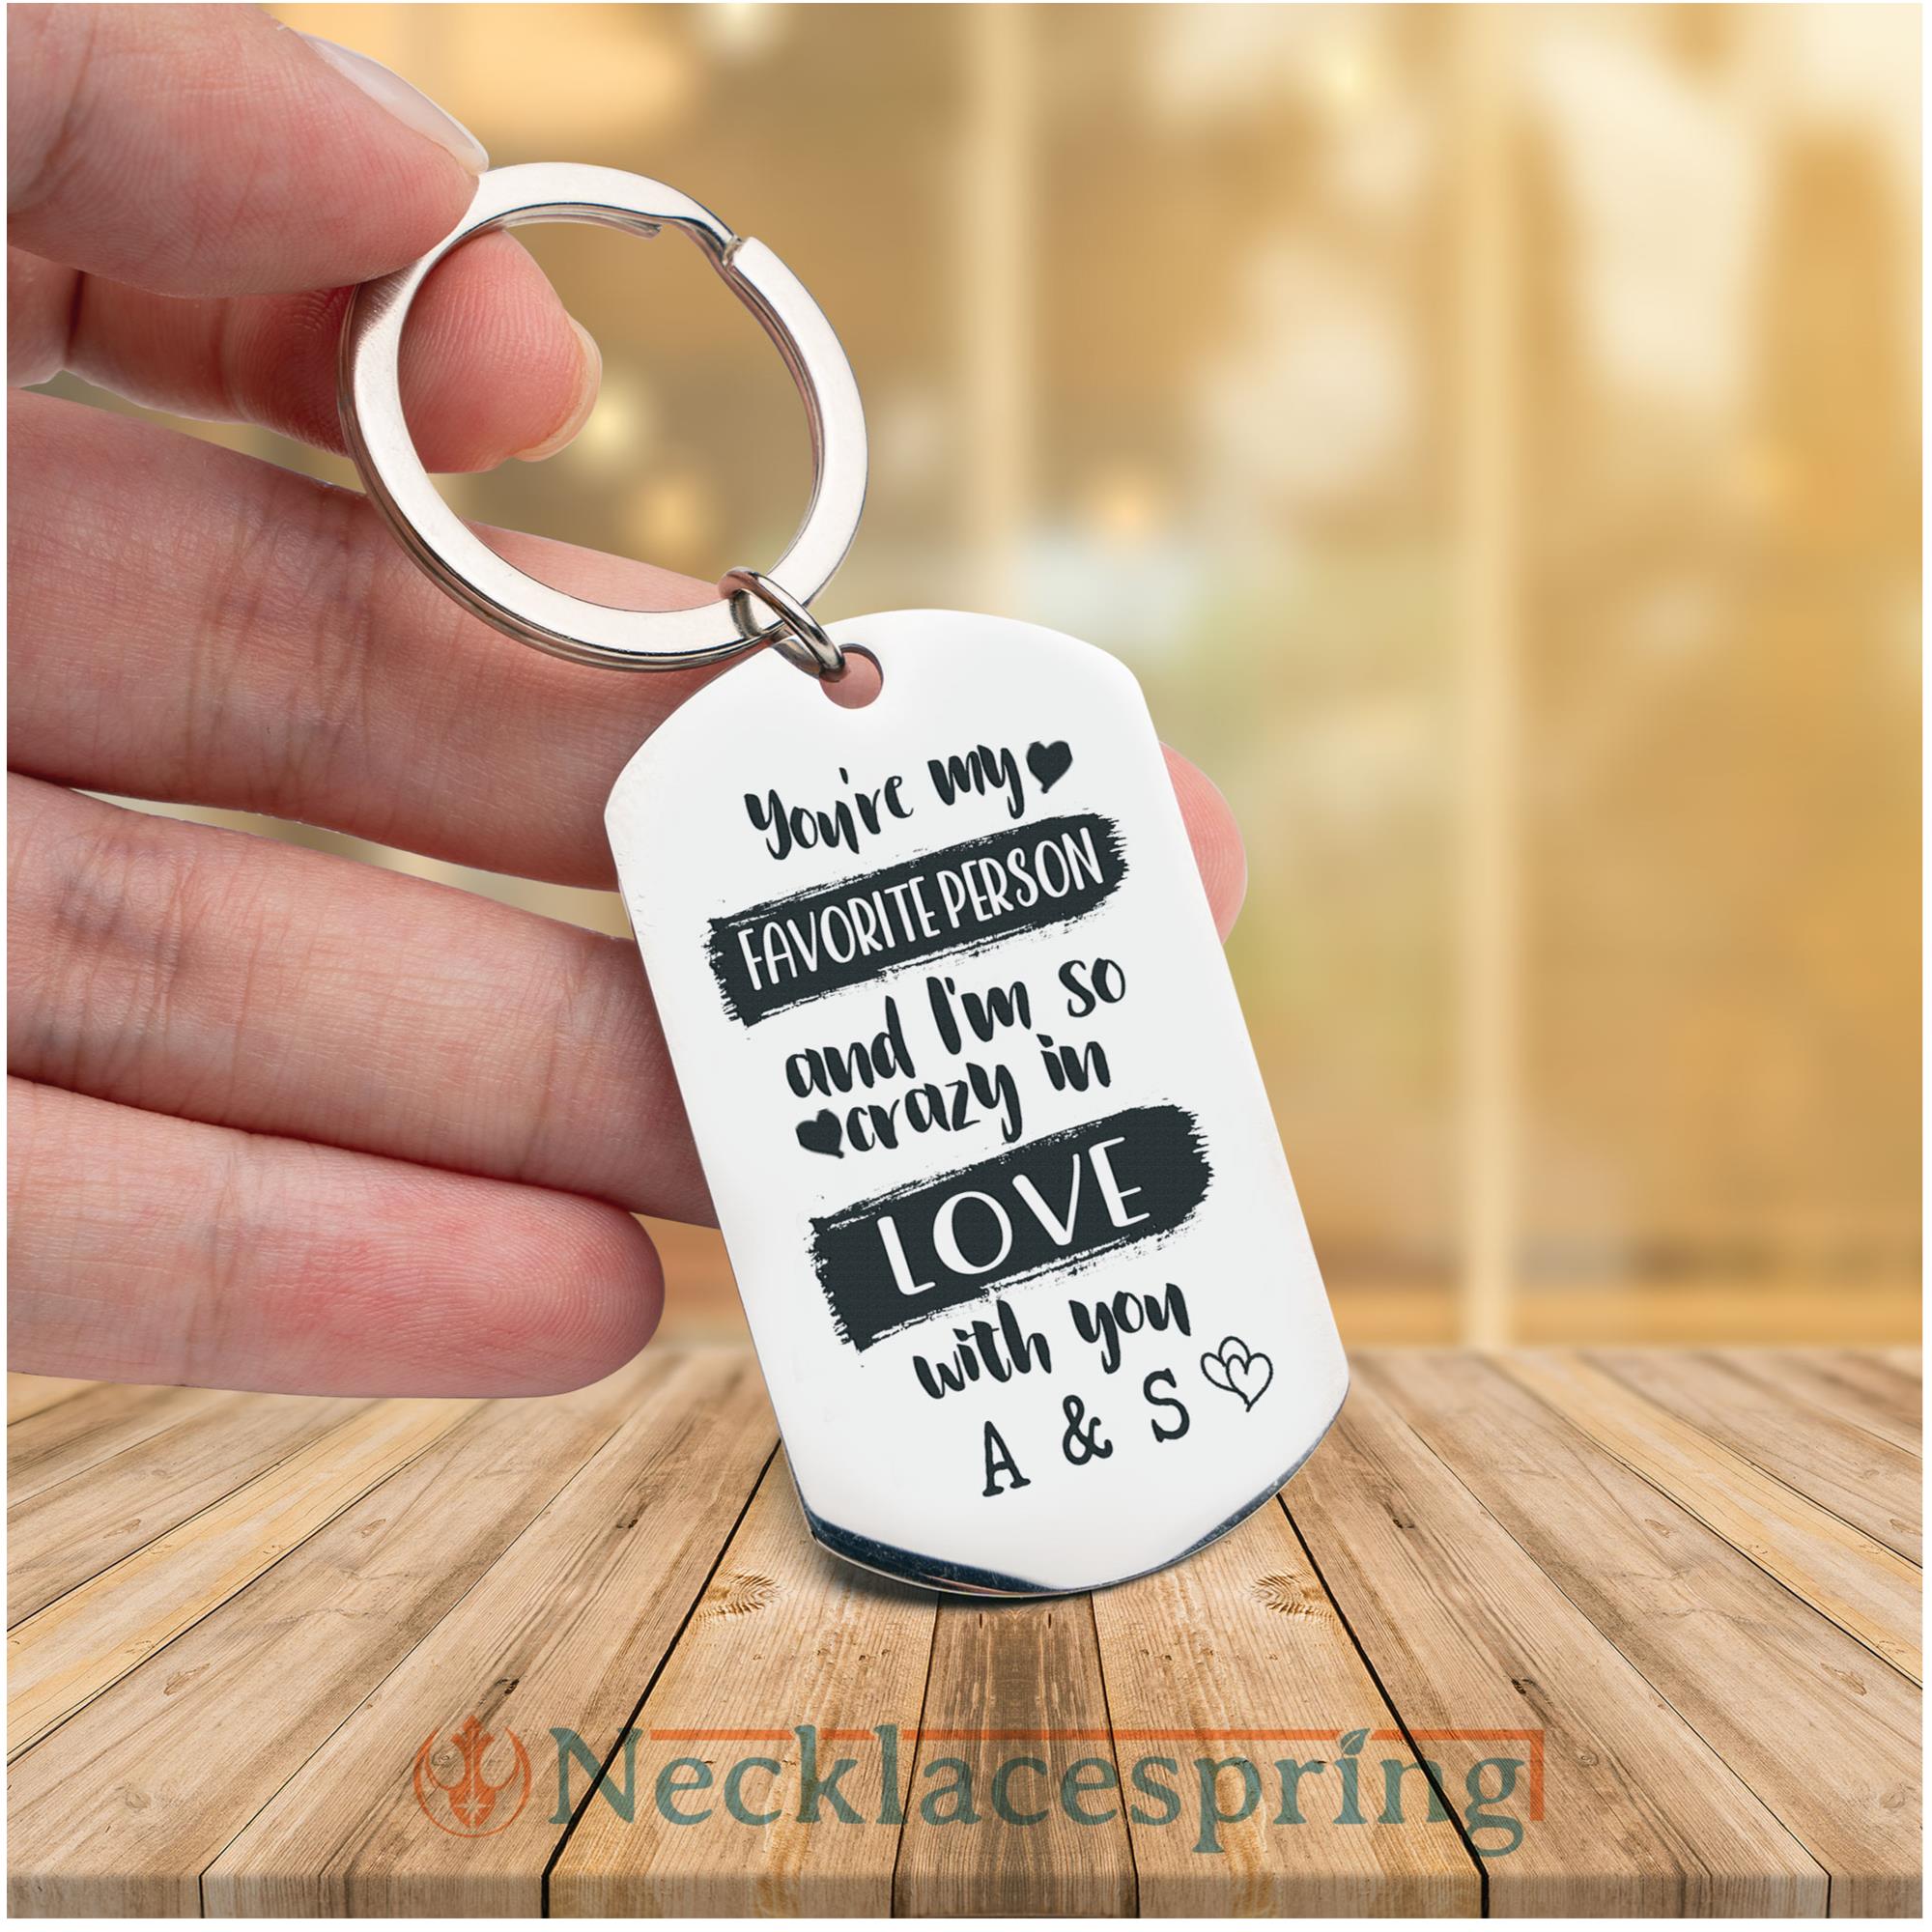 Custom Engraved Personalized Metal Keychain